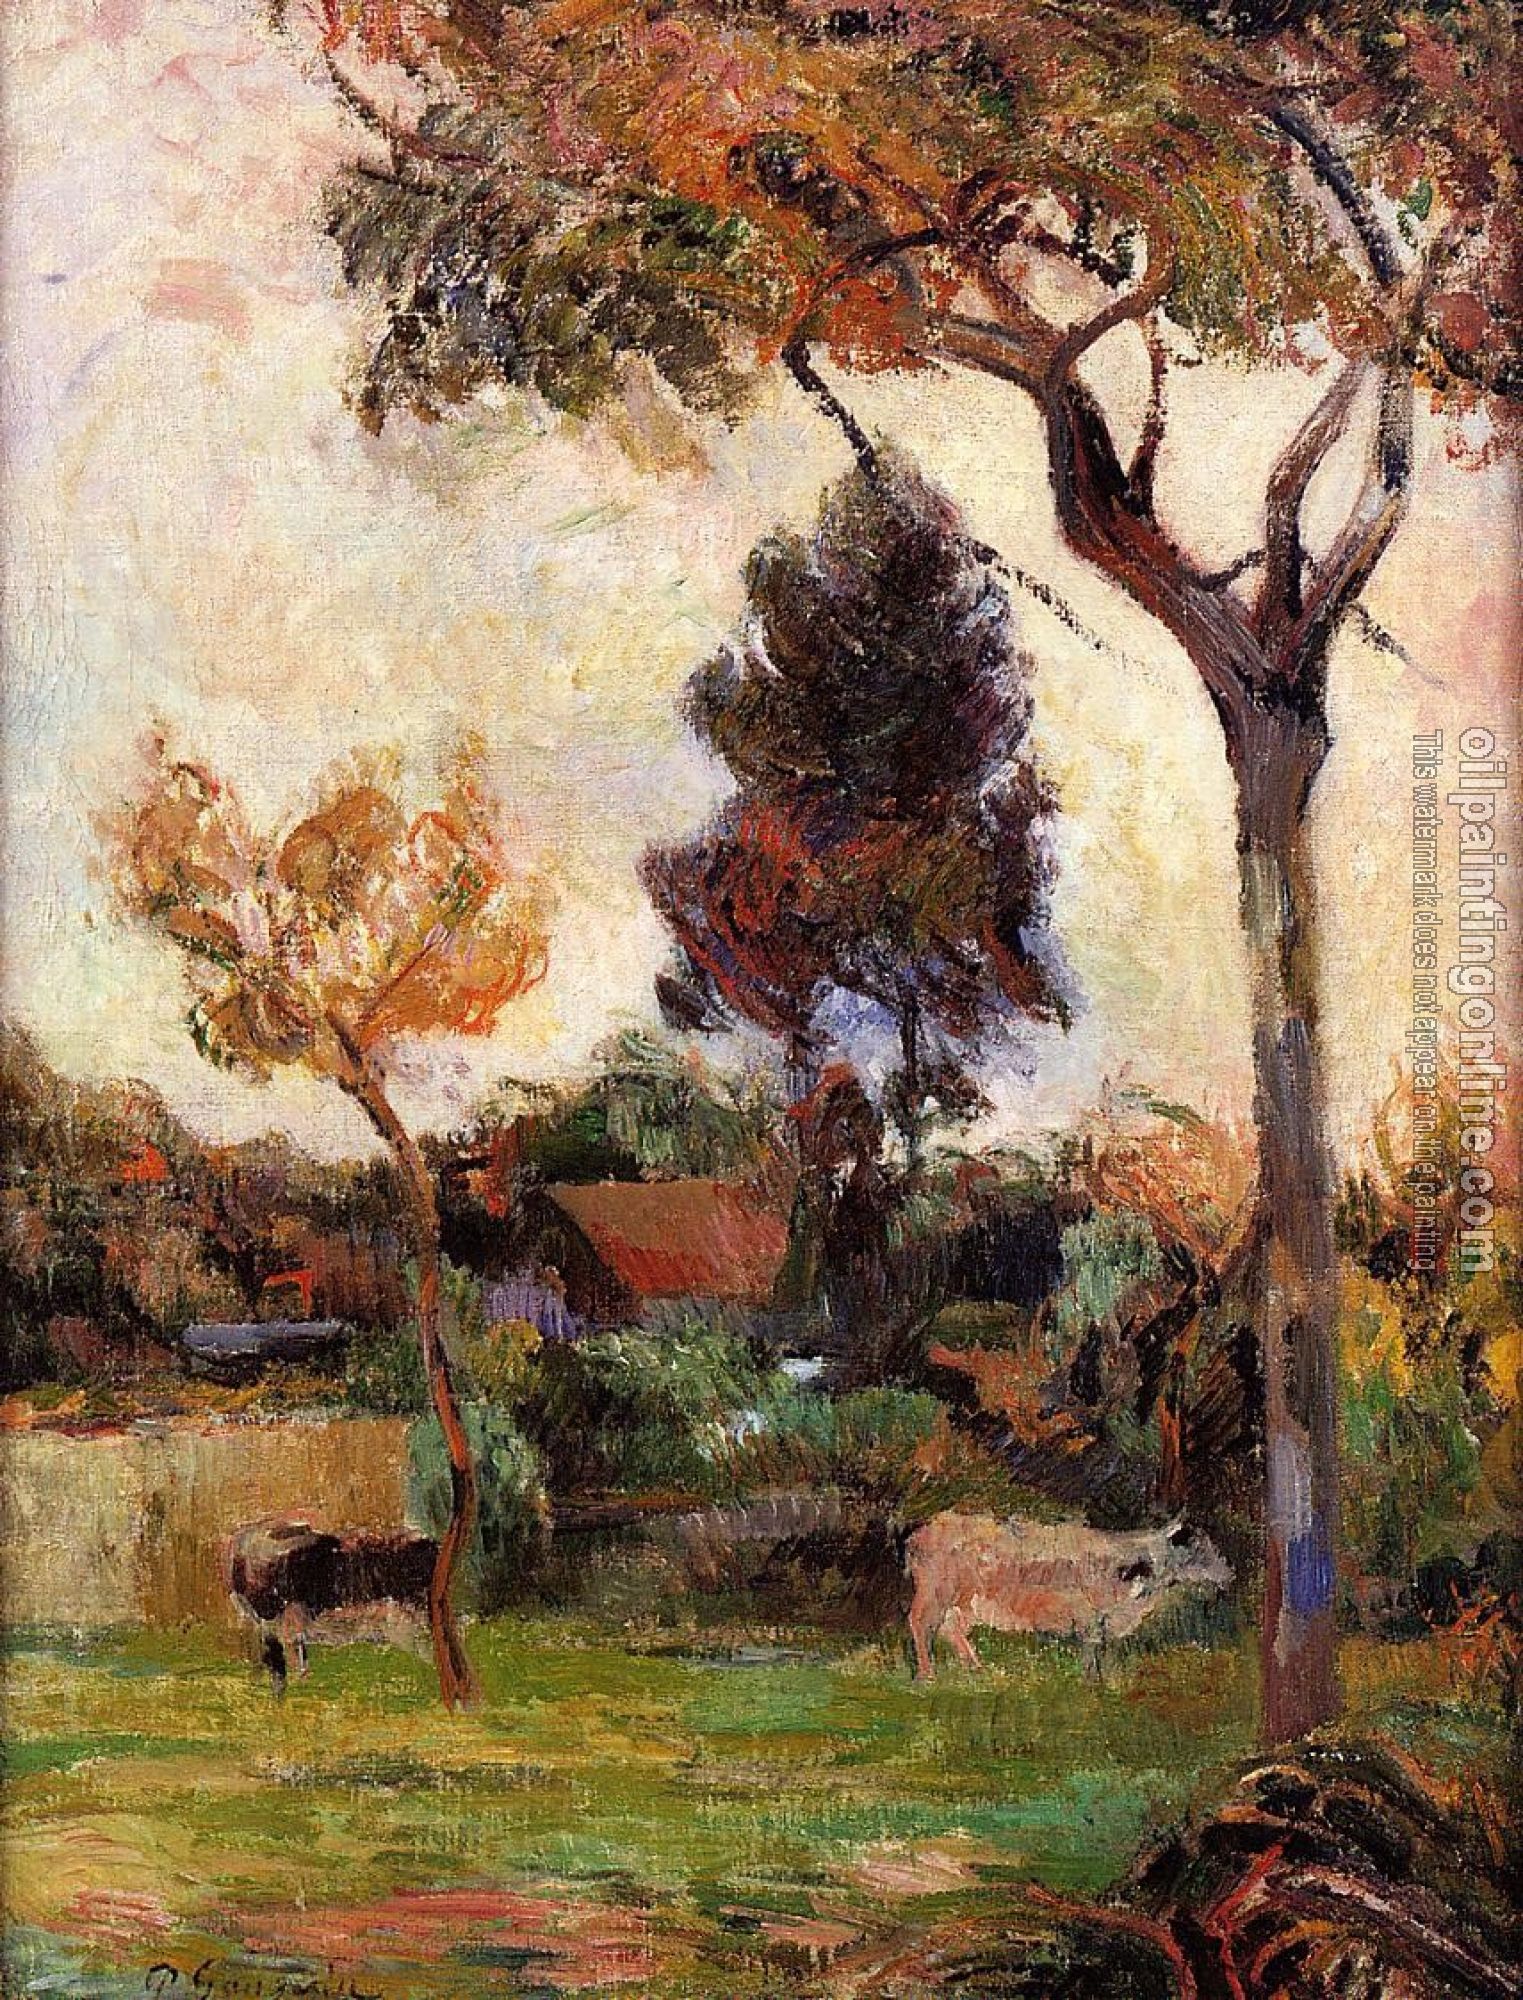 Gauguin, Paul - Two Cows in the Meadow